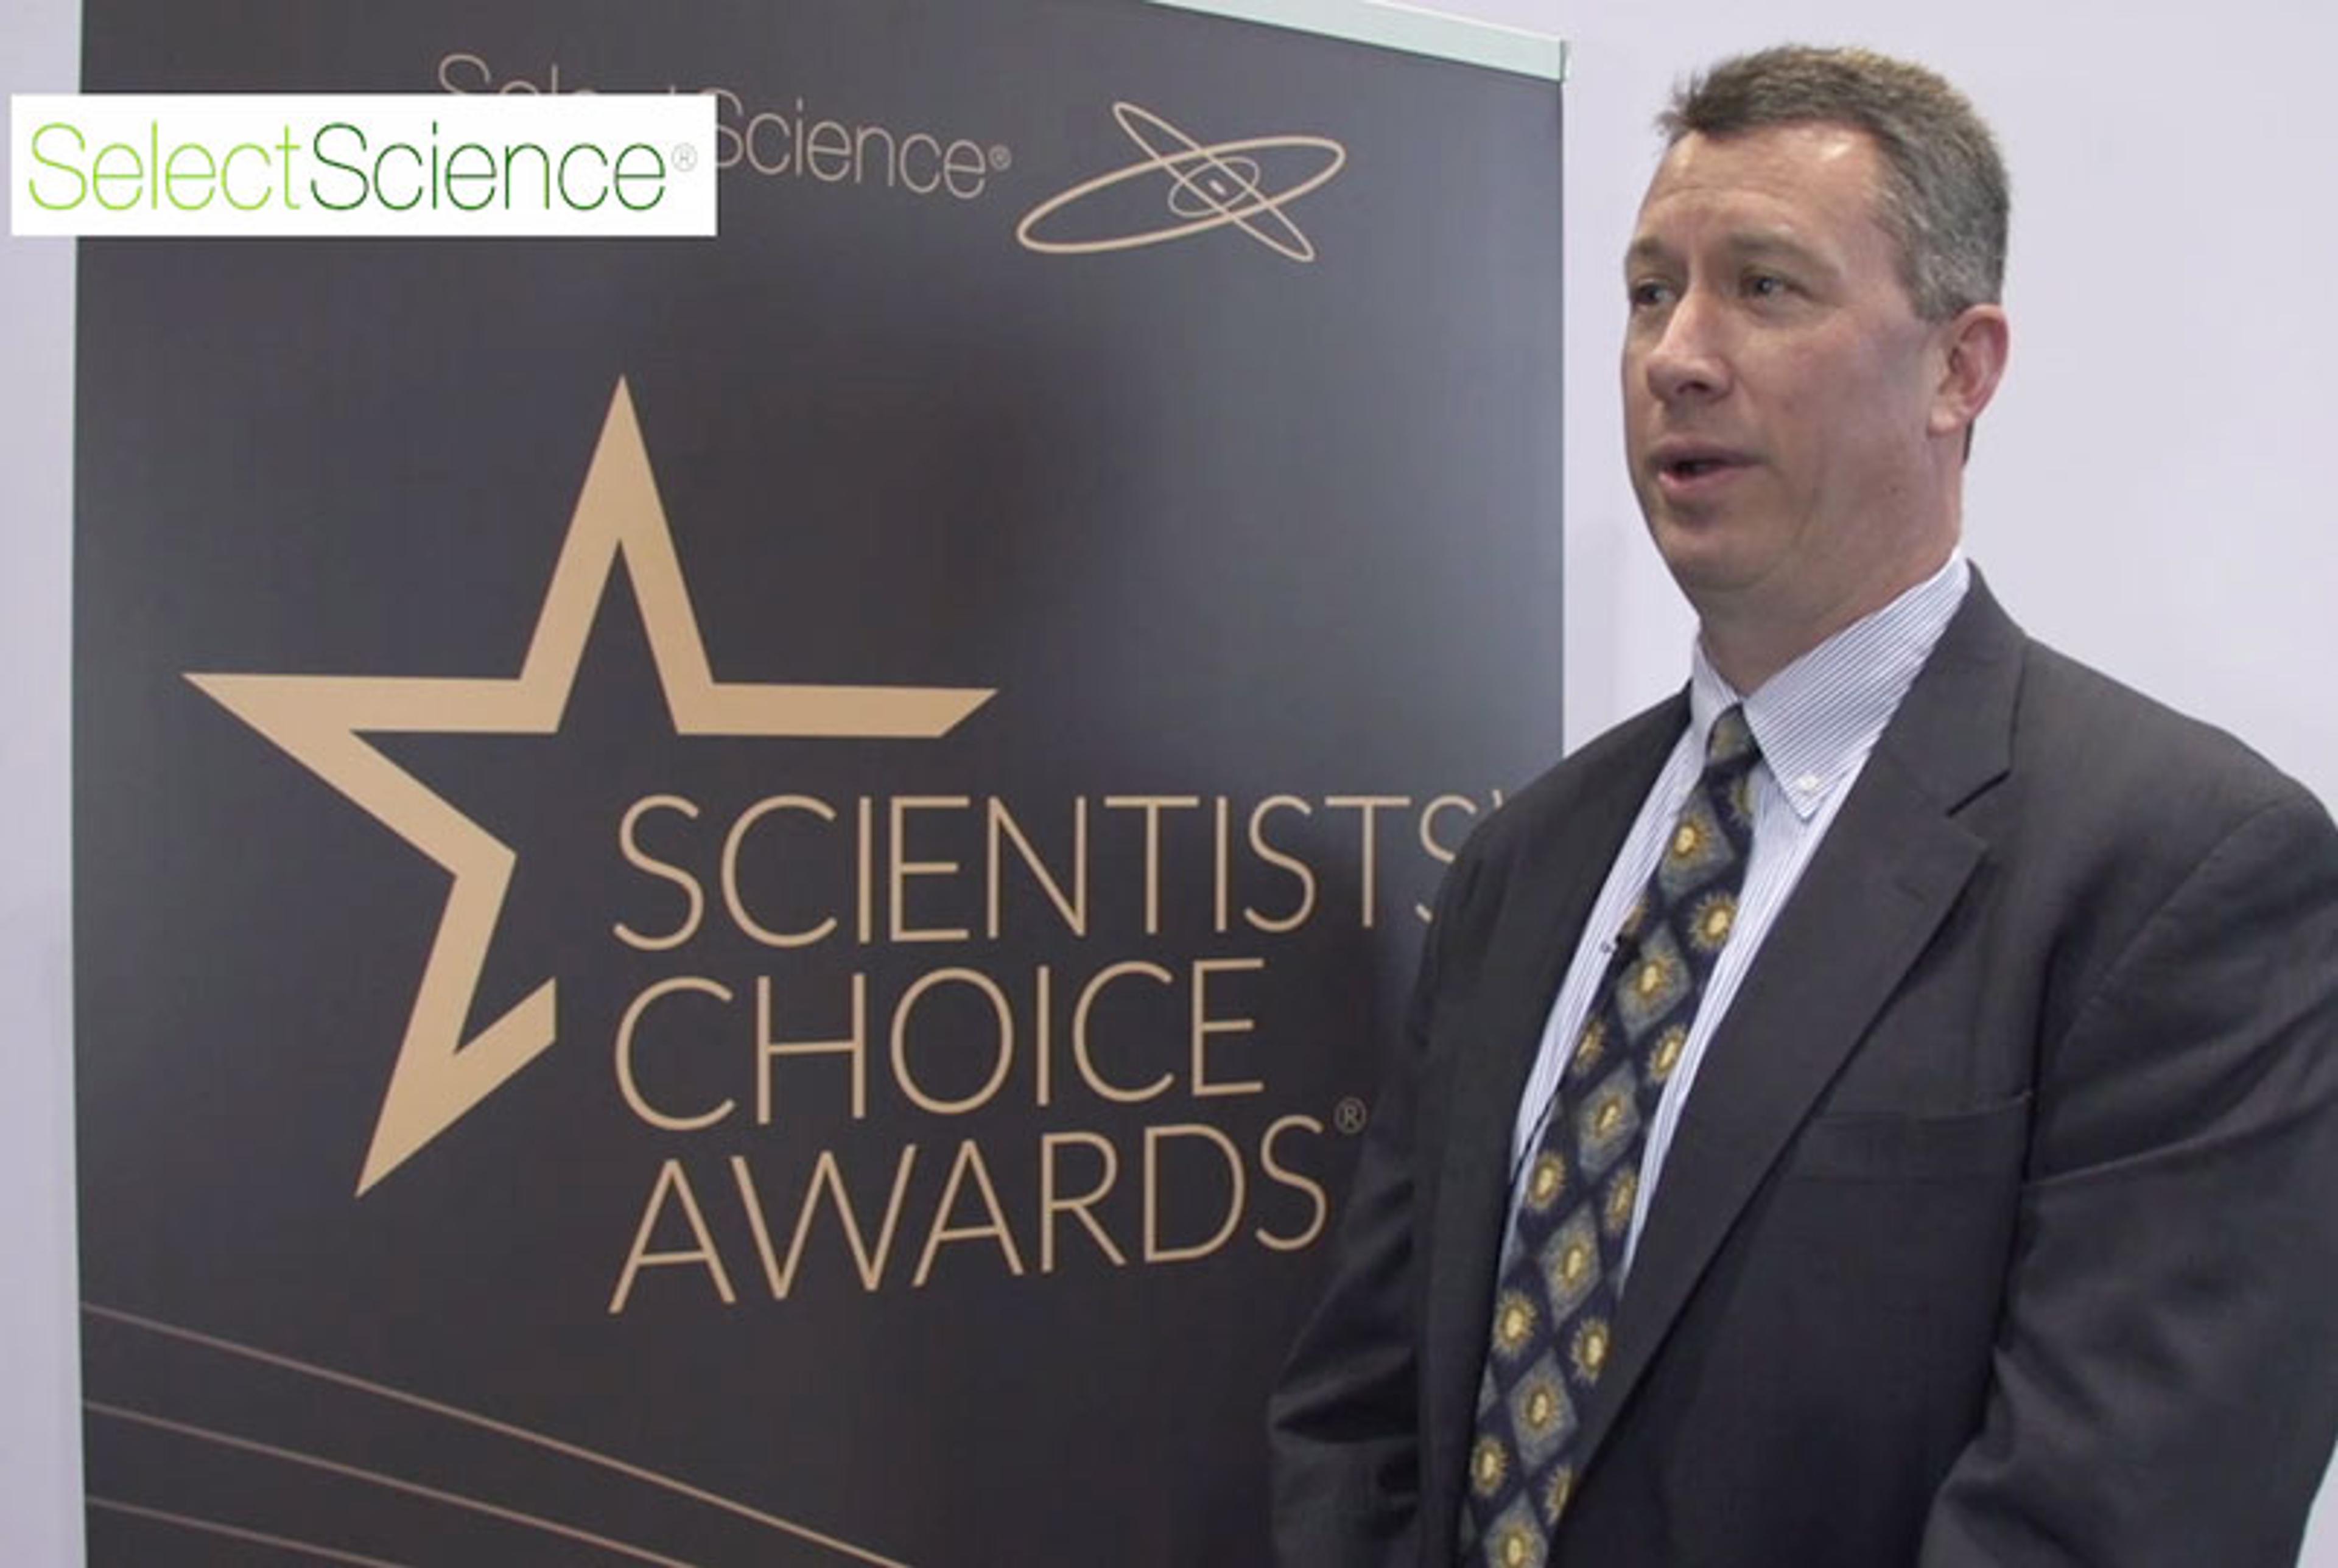 Thermo Fisher Scientific Receives the Scientists’ Choice Award for Company of the Year